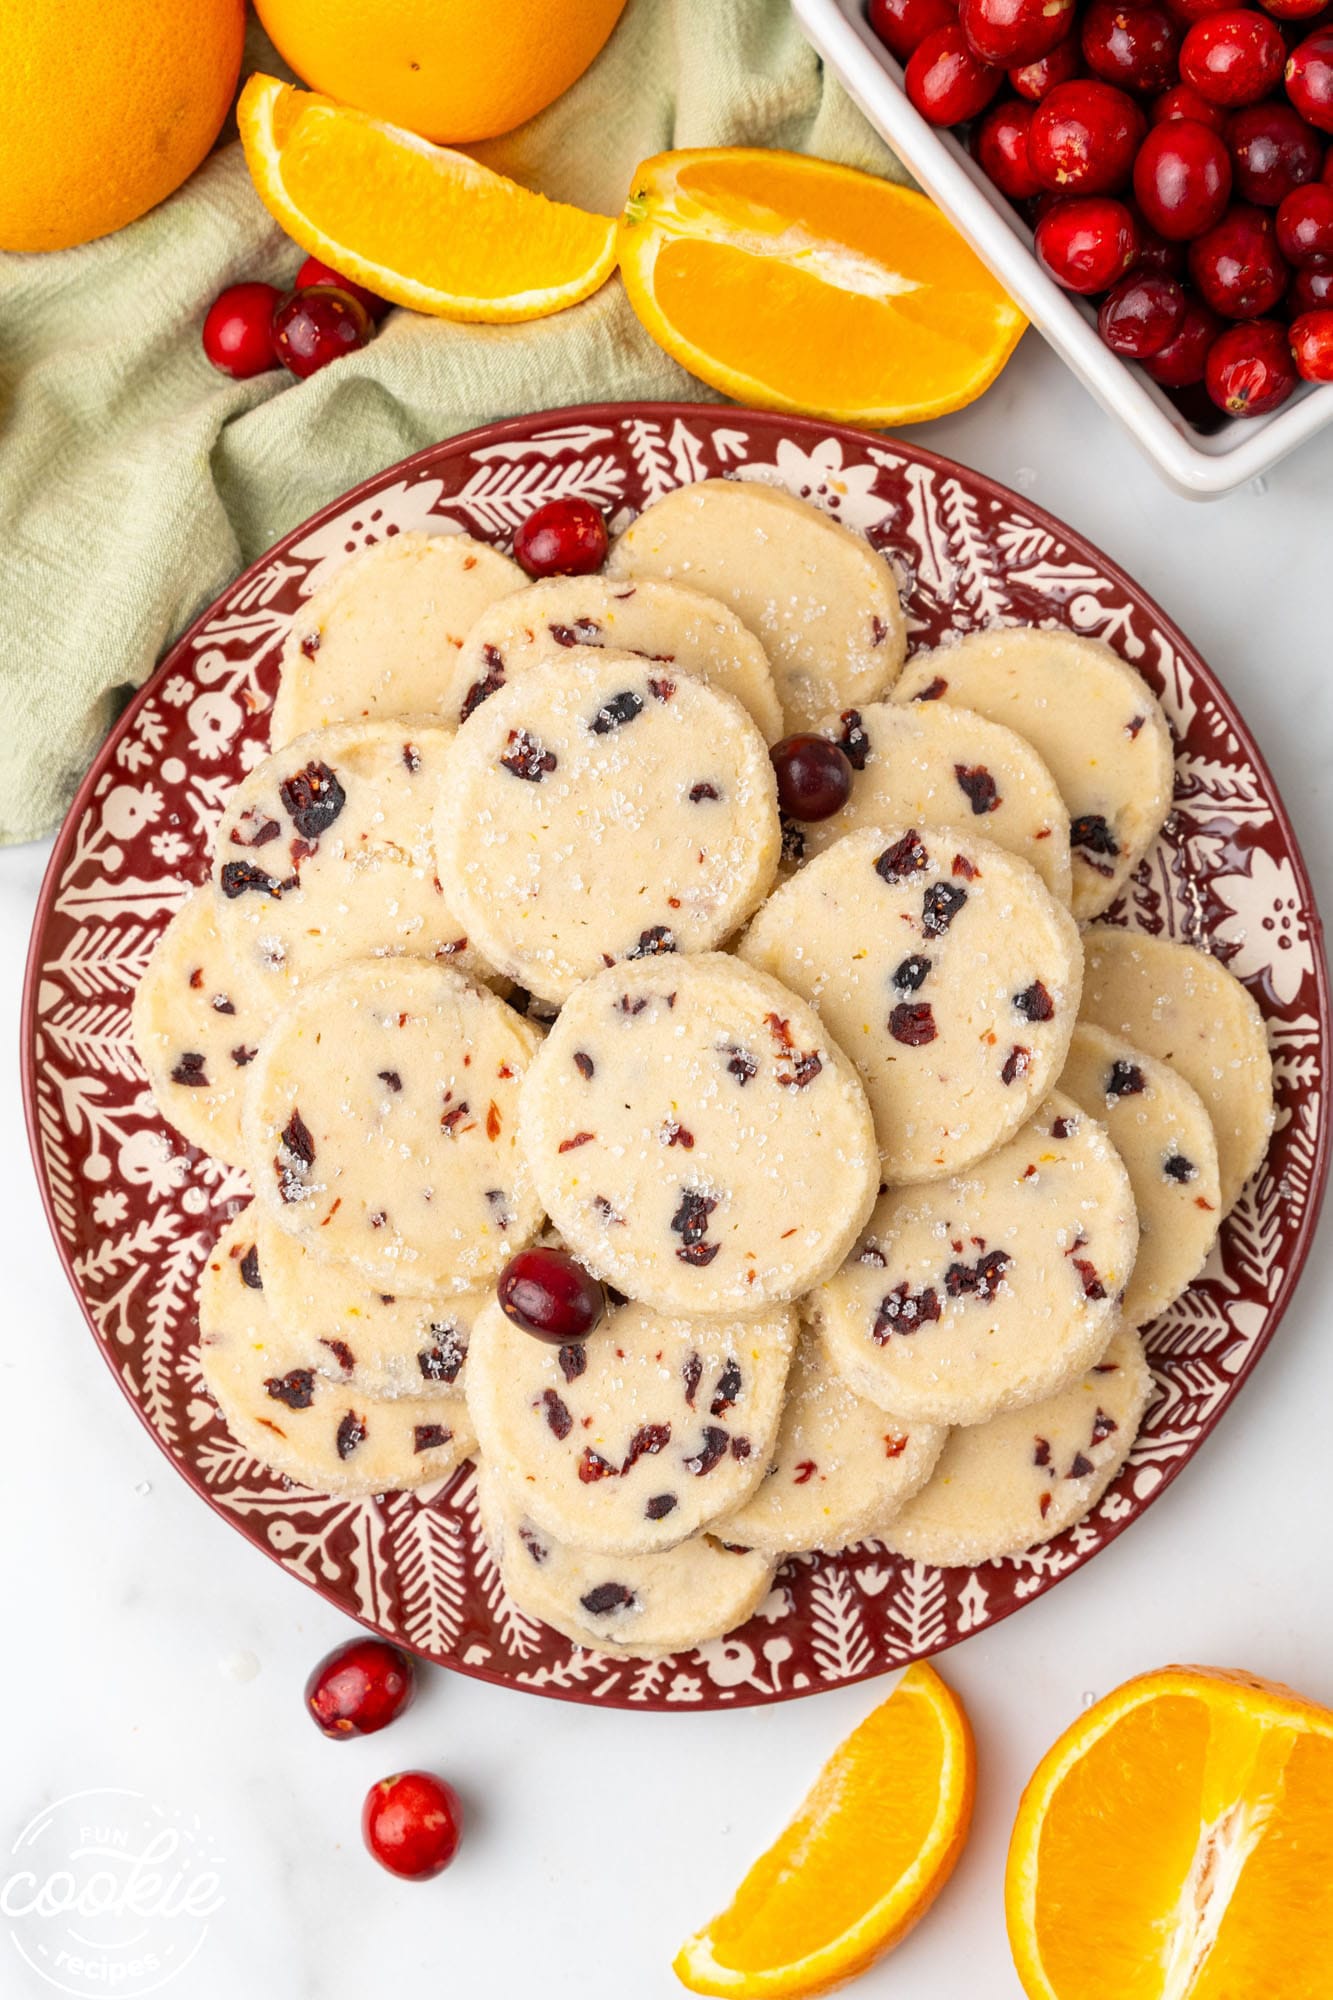 a red and white patterned plate holding a pile of round shortbread cookies with cranberries. Around the plate are fresh orange wedges and fresh cranberries.